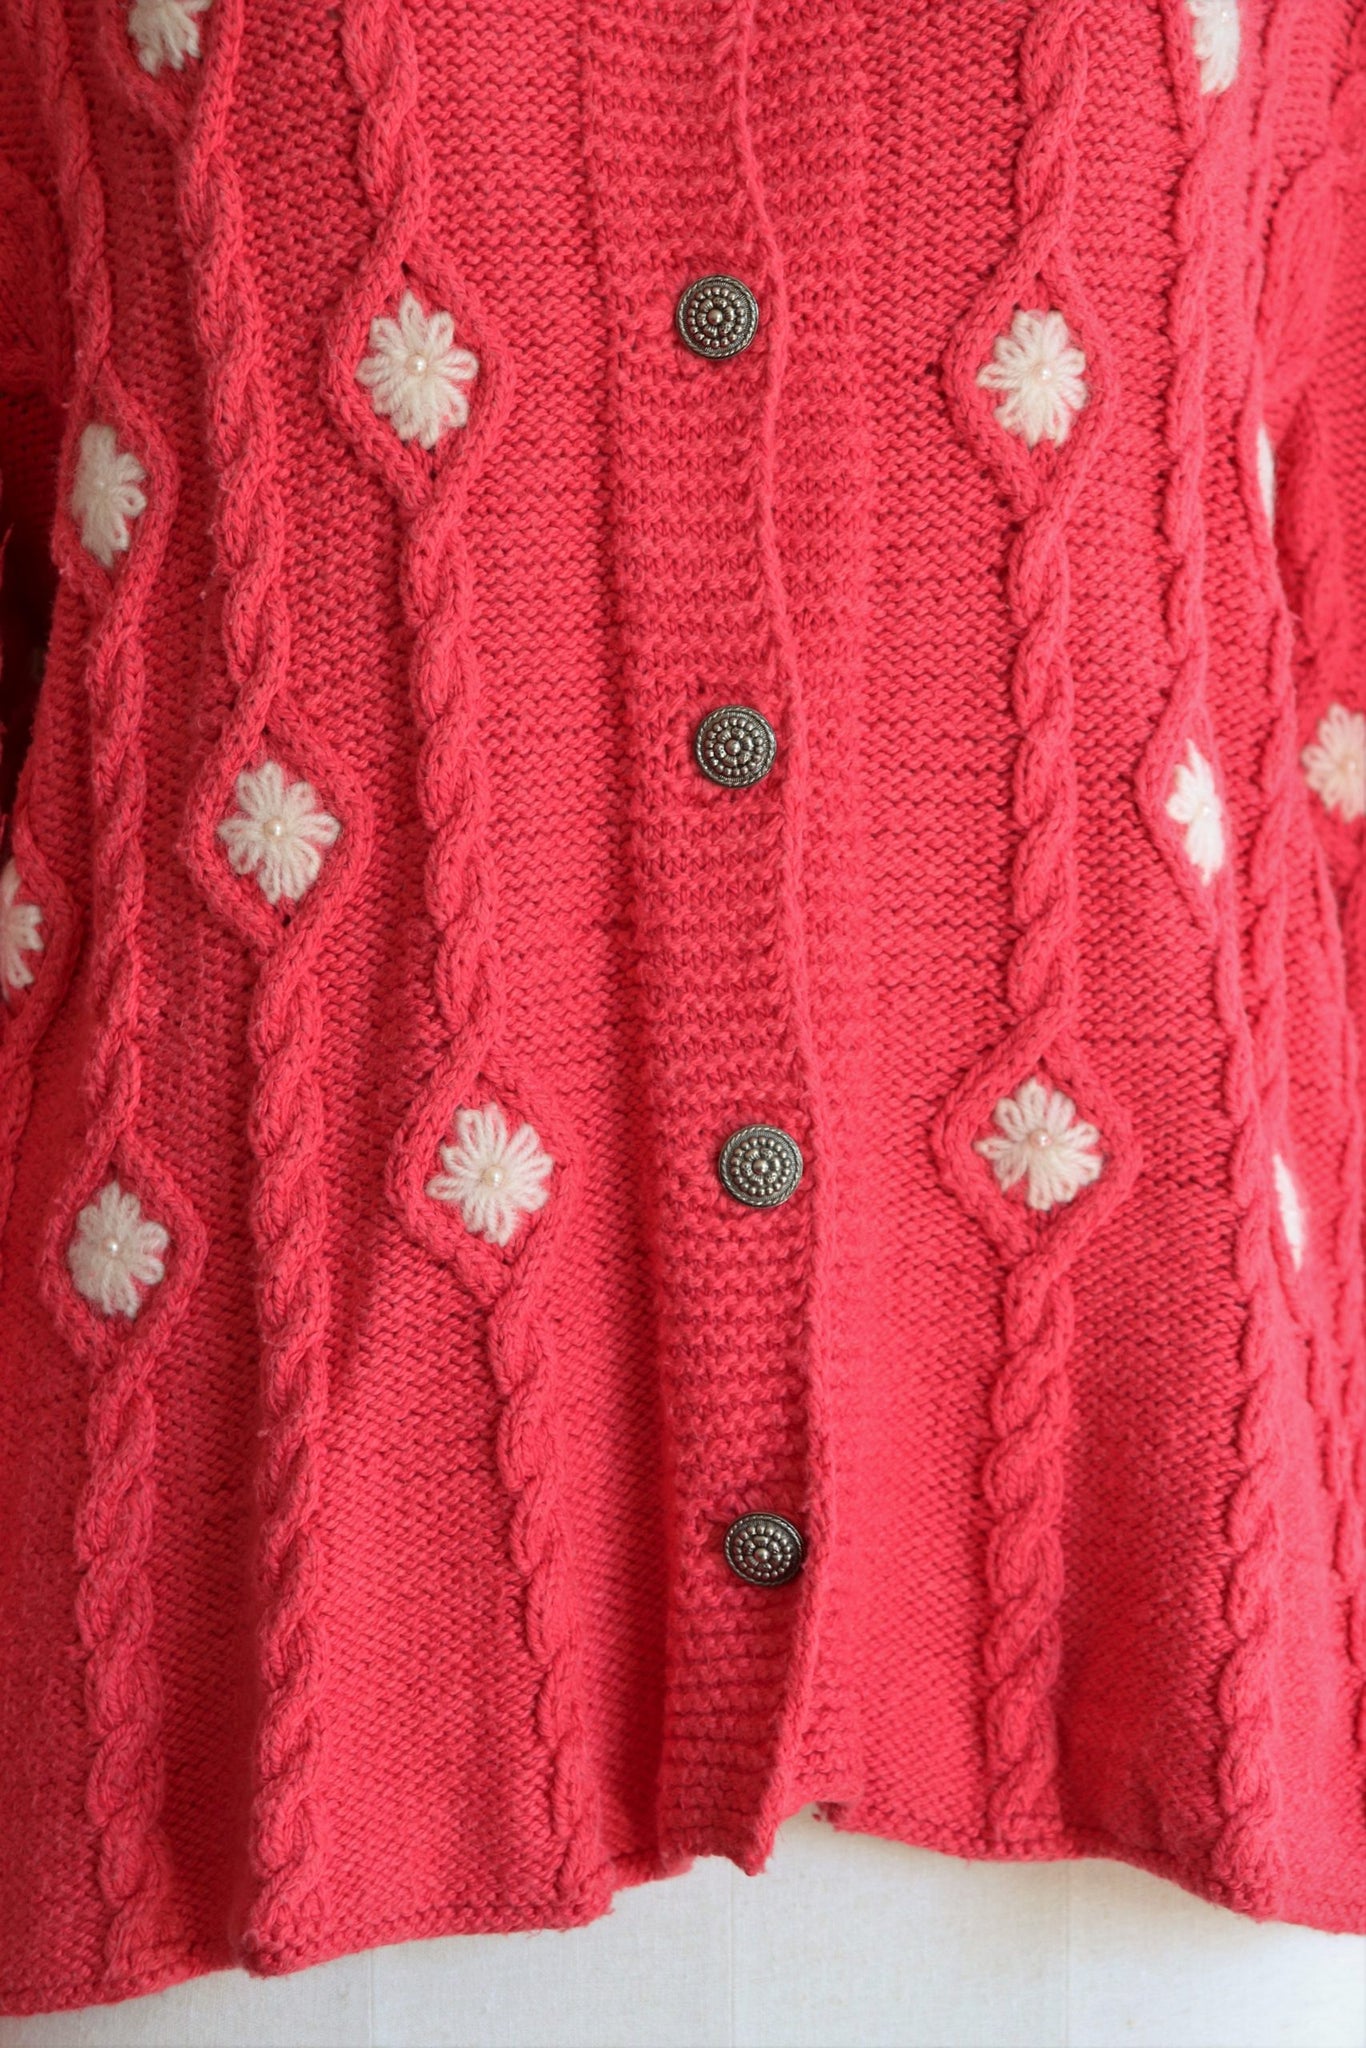 Austrian Hand knit Cardigan Embroidered Flowers Pink